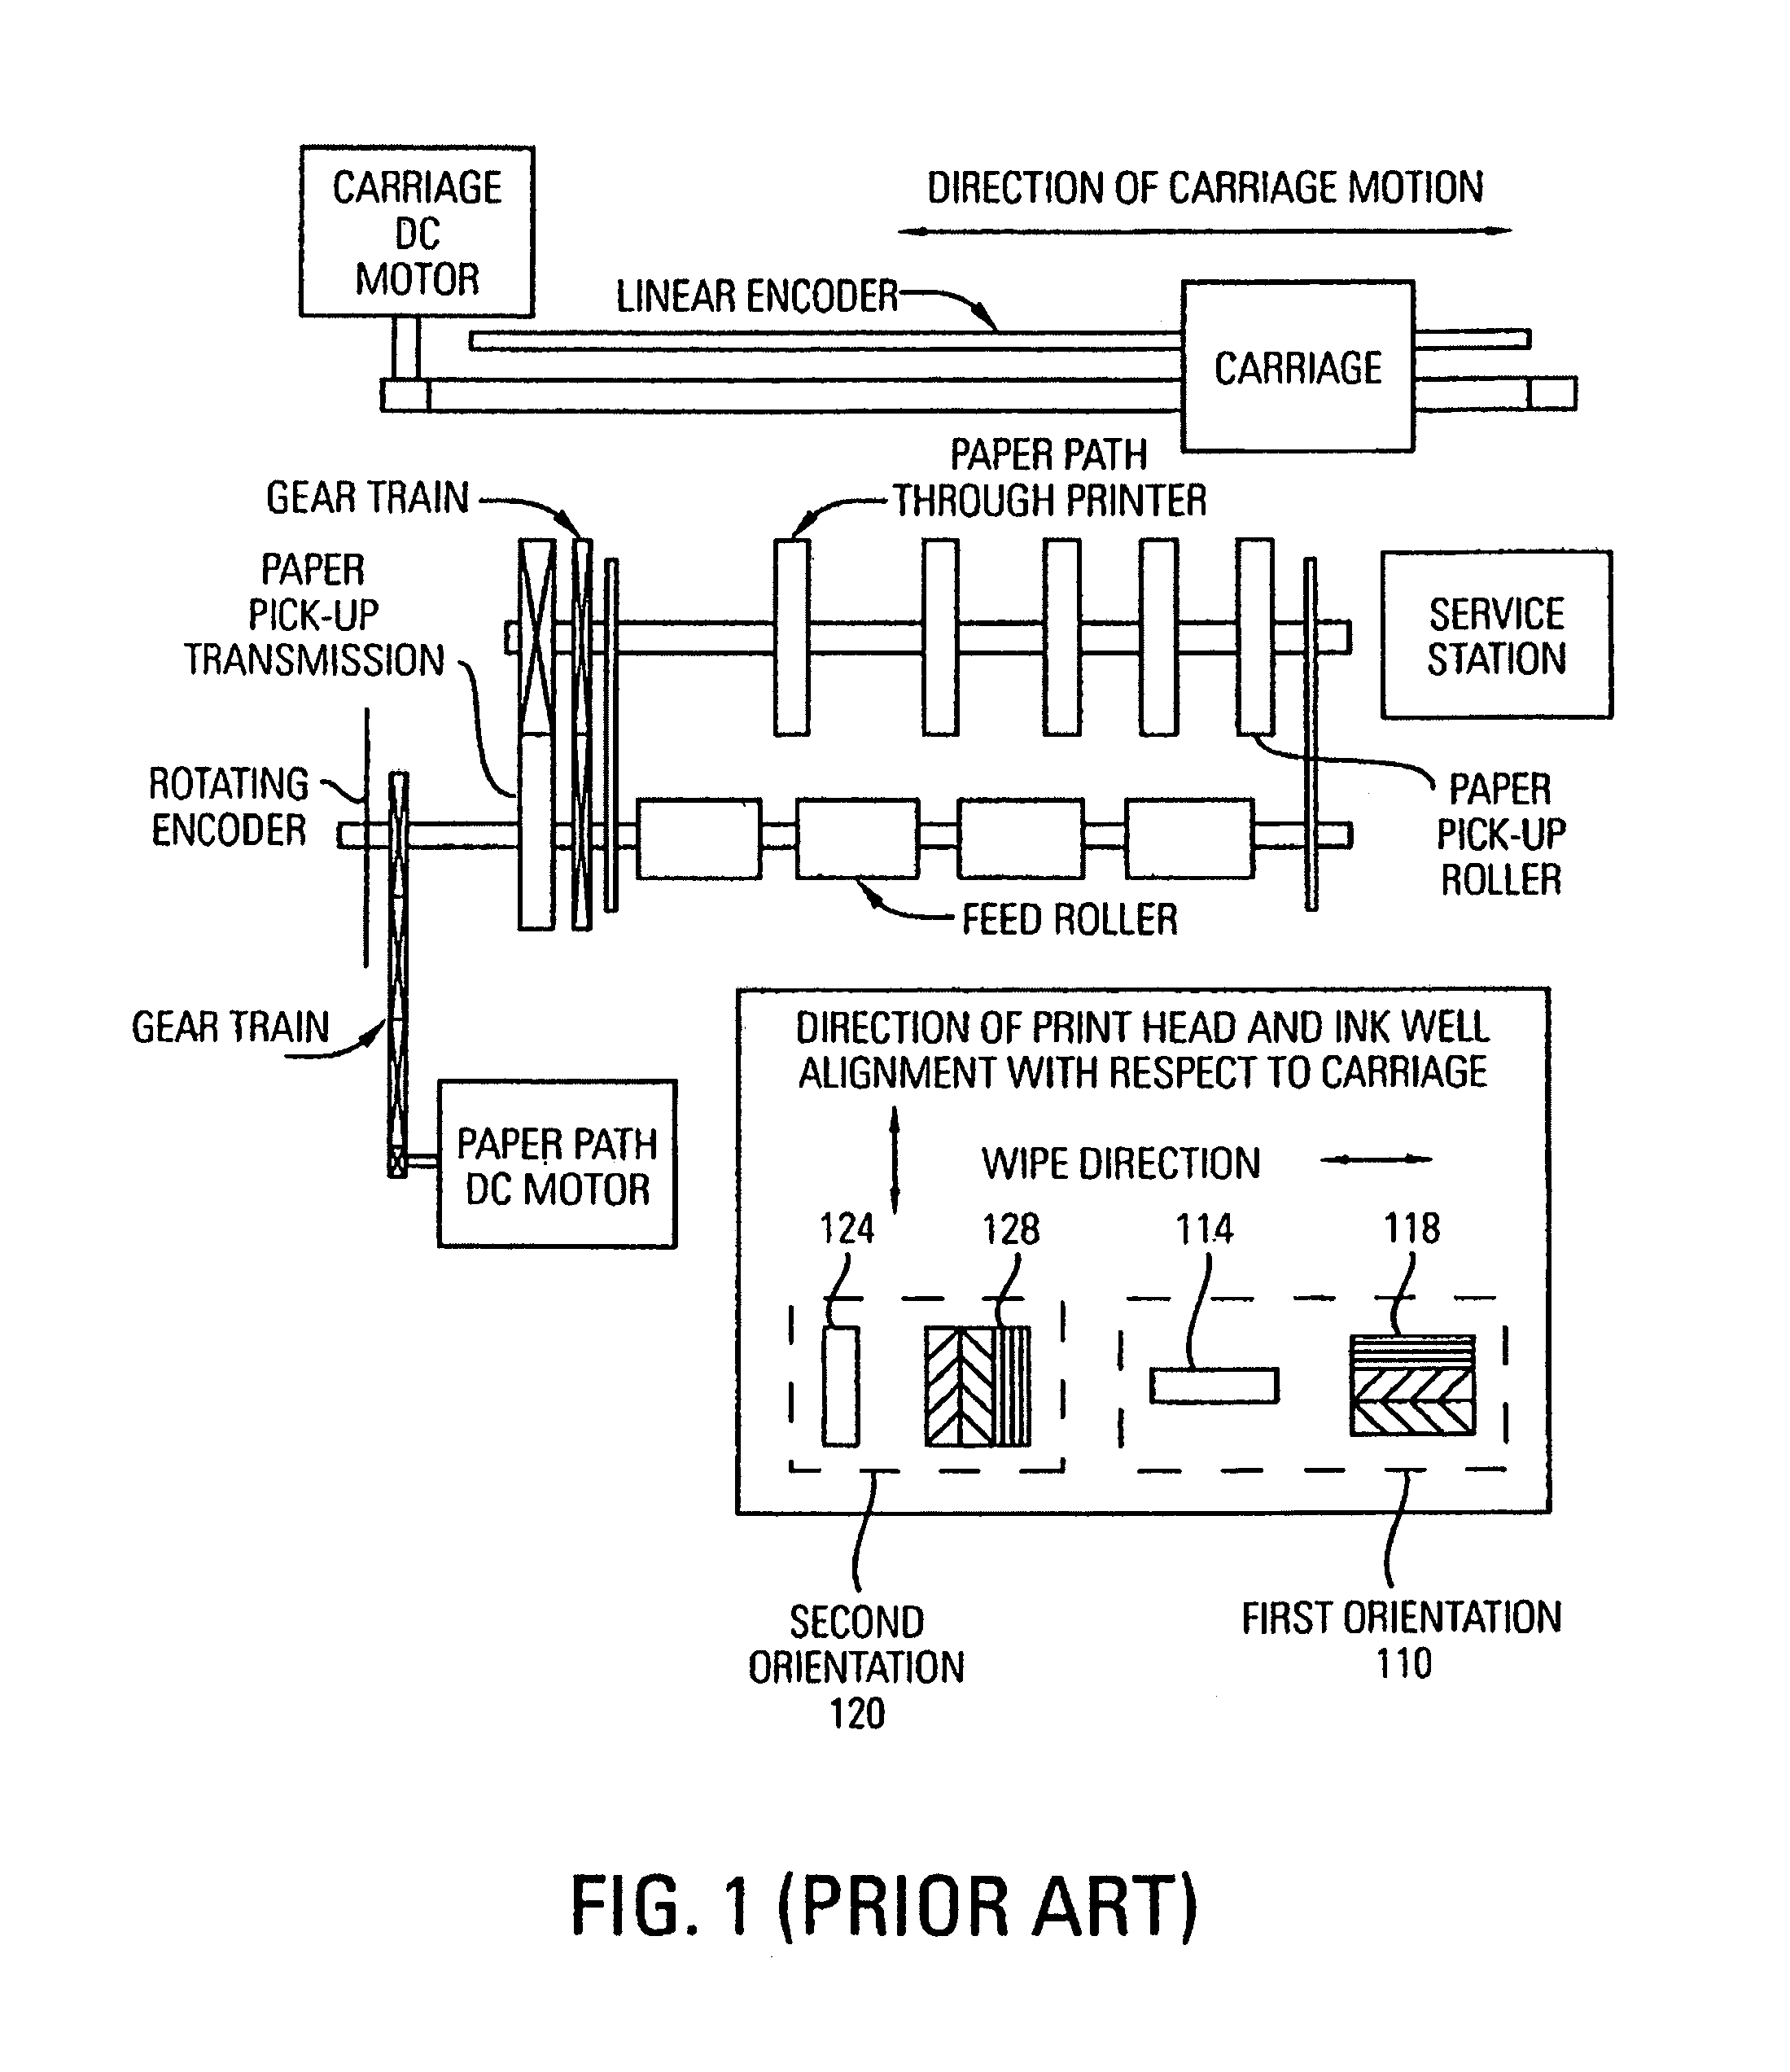 Method and system of capping that employs a treadmill belt